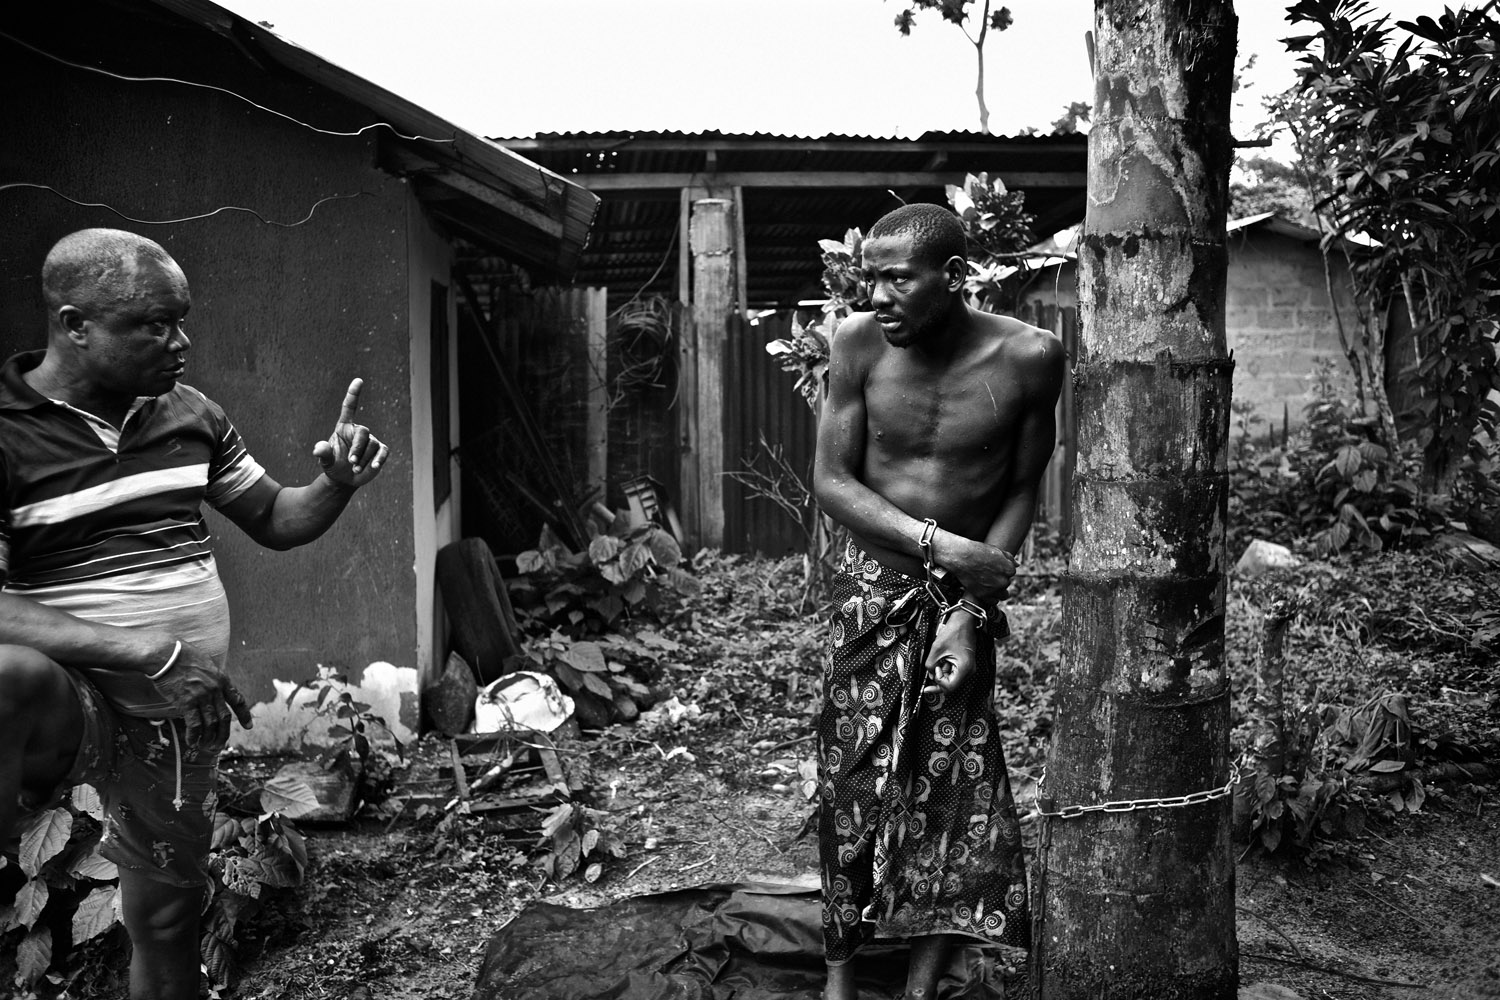 Native Doctor Lekwe Deezia claims to heal mental illness through the power of prayer and traditional herbal medicines. While receiving treatment, which can sometimes take months, his patients are chained to trees in his courtyard. They are not given shelter or protection from the elements and are visibly terrified of the doctor. The Niger Delta, Nigeria. October 2012.